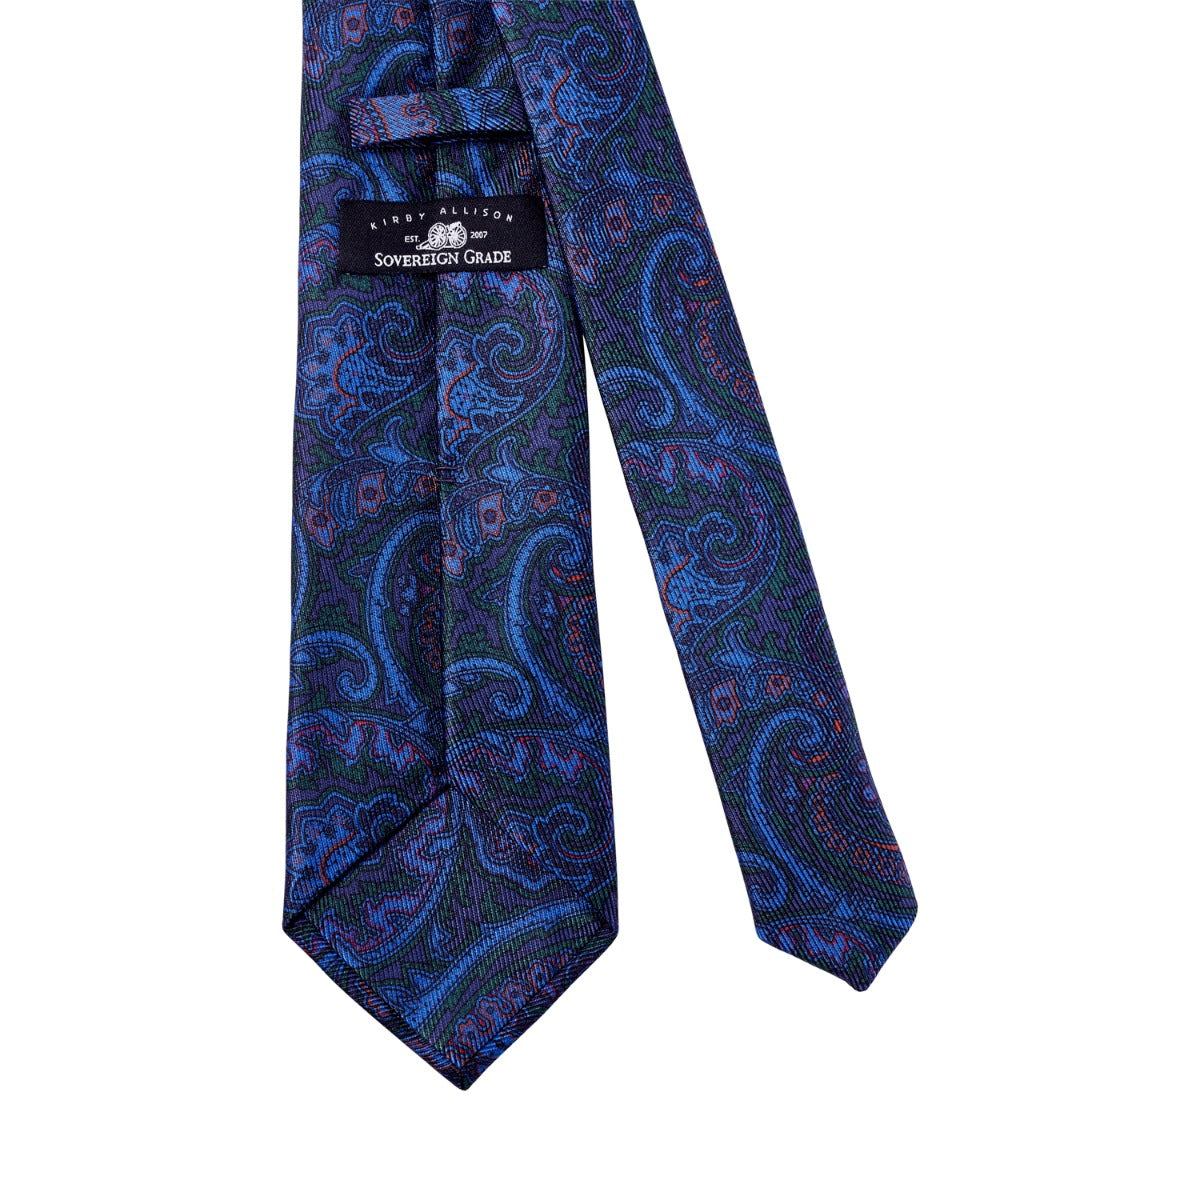 A Sovereign Grade Navy and Forest Paisley Ancient Madder Silk Tie by KirbyAllison.com on a white background.